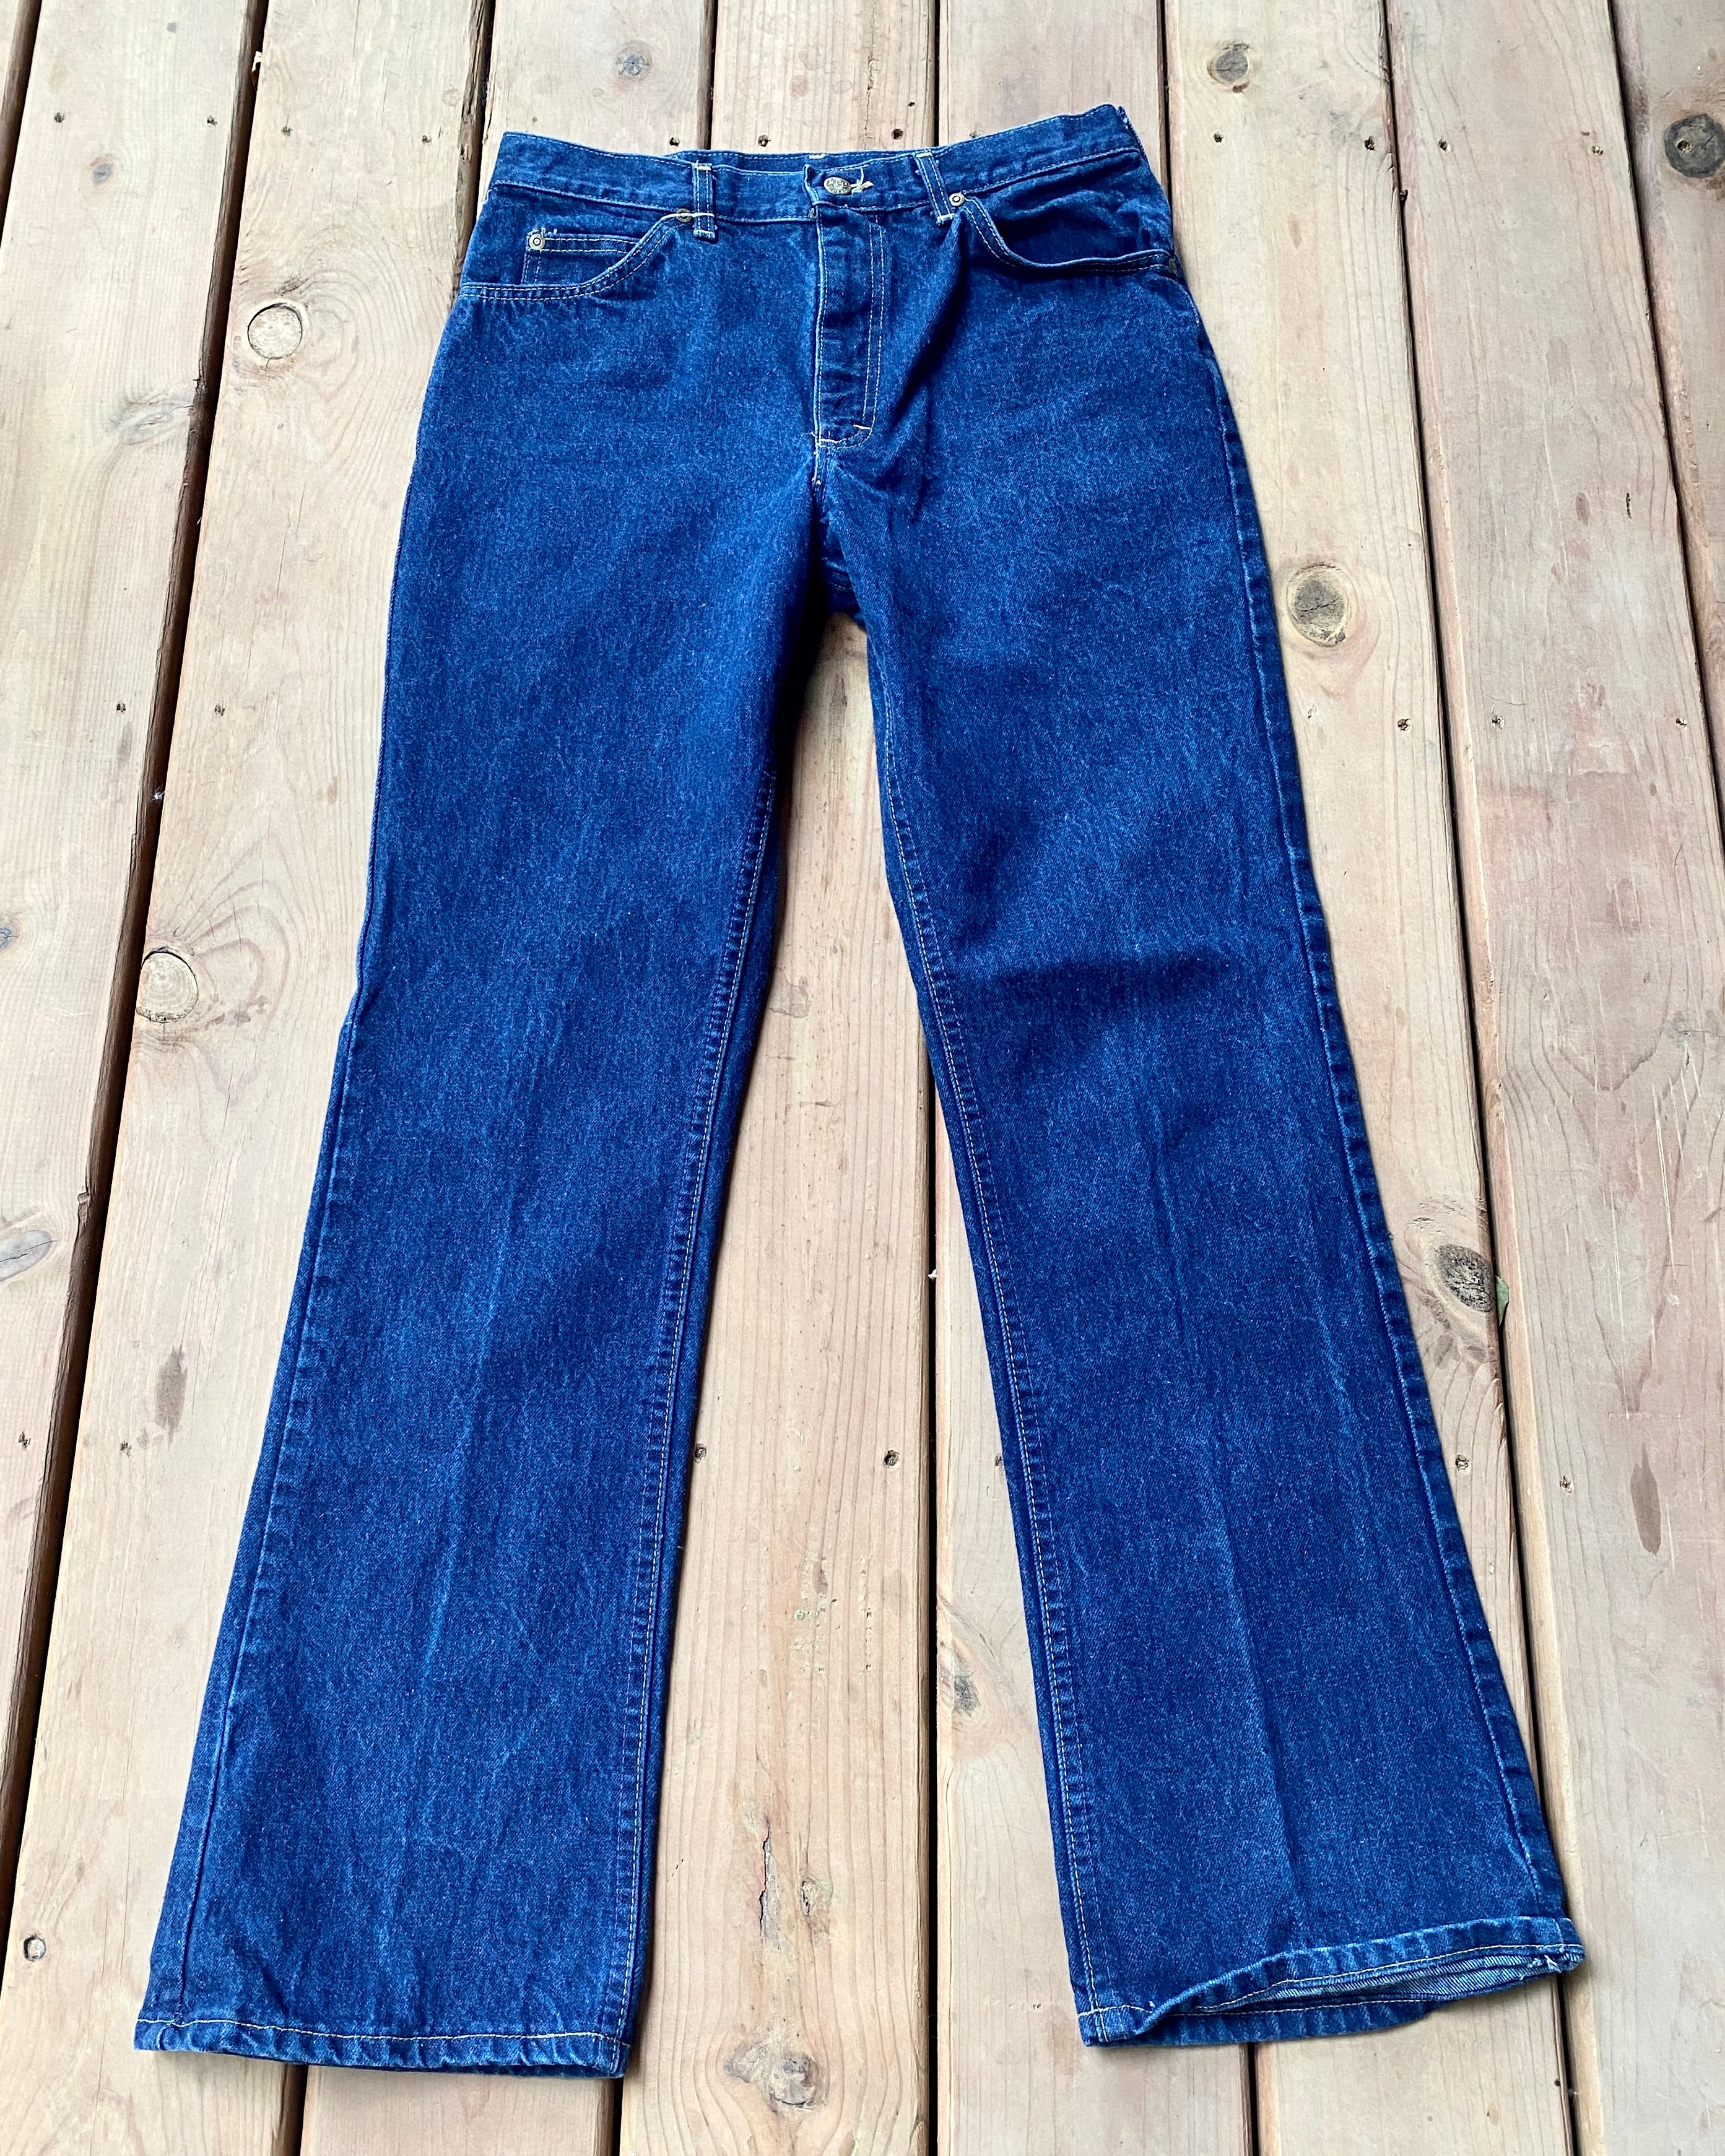 Vintage 1970s LEE Riders Made in USA Dark Wash Flare Jeans 31